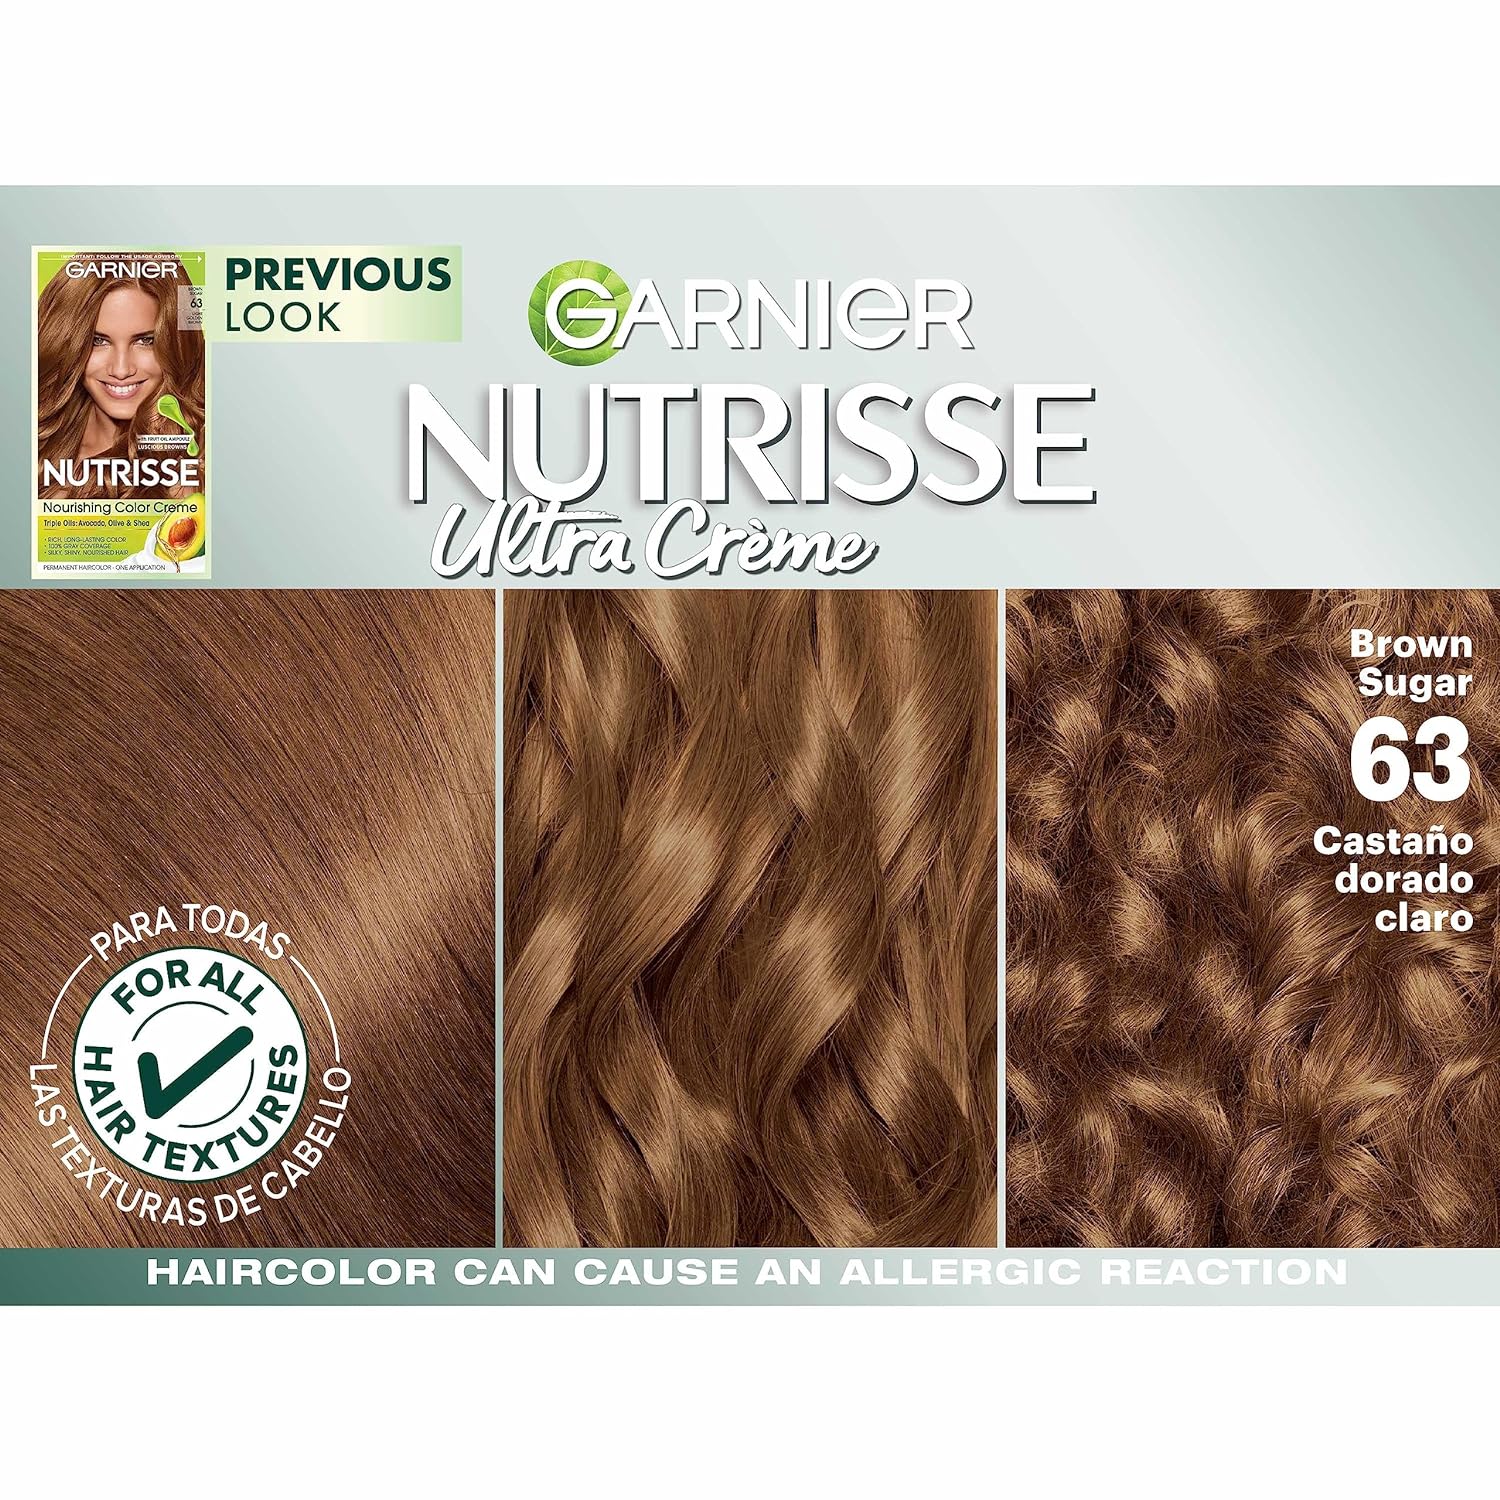 Garnier Hair Color Nutrisse Nourishing Creme, 63 Light Golden Brown (Brown Sugar) Permanent Hair Dye, 2 Count (Packaging May Vary) : Beauty & Personal Care